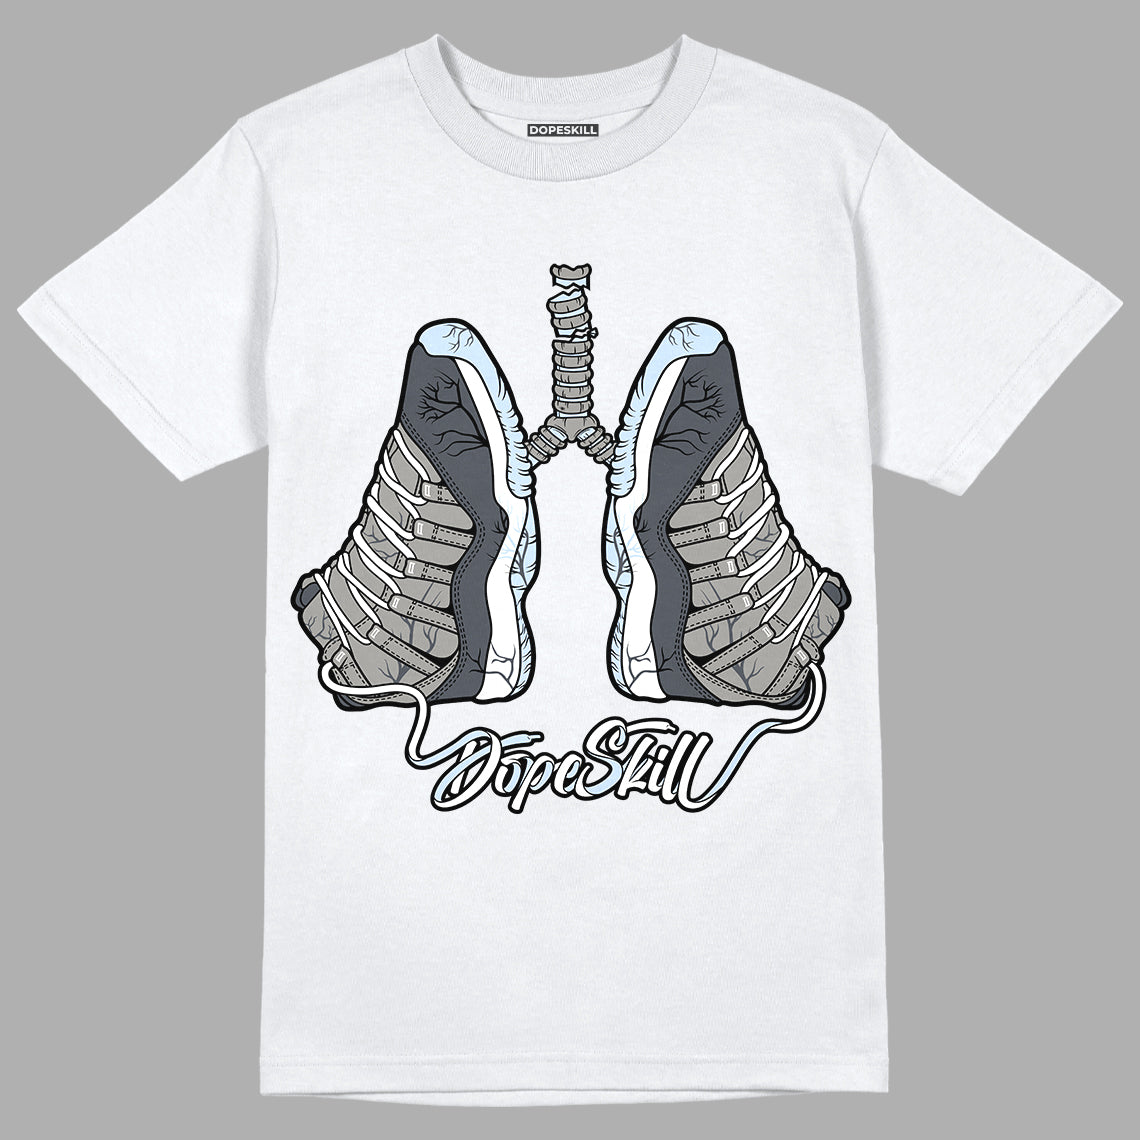 Cool Grey 11s DopeSkill T-Shirt Breathe Graphic, hiphop tees, grey graphic tees, sneakers match shirt - White